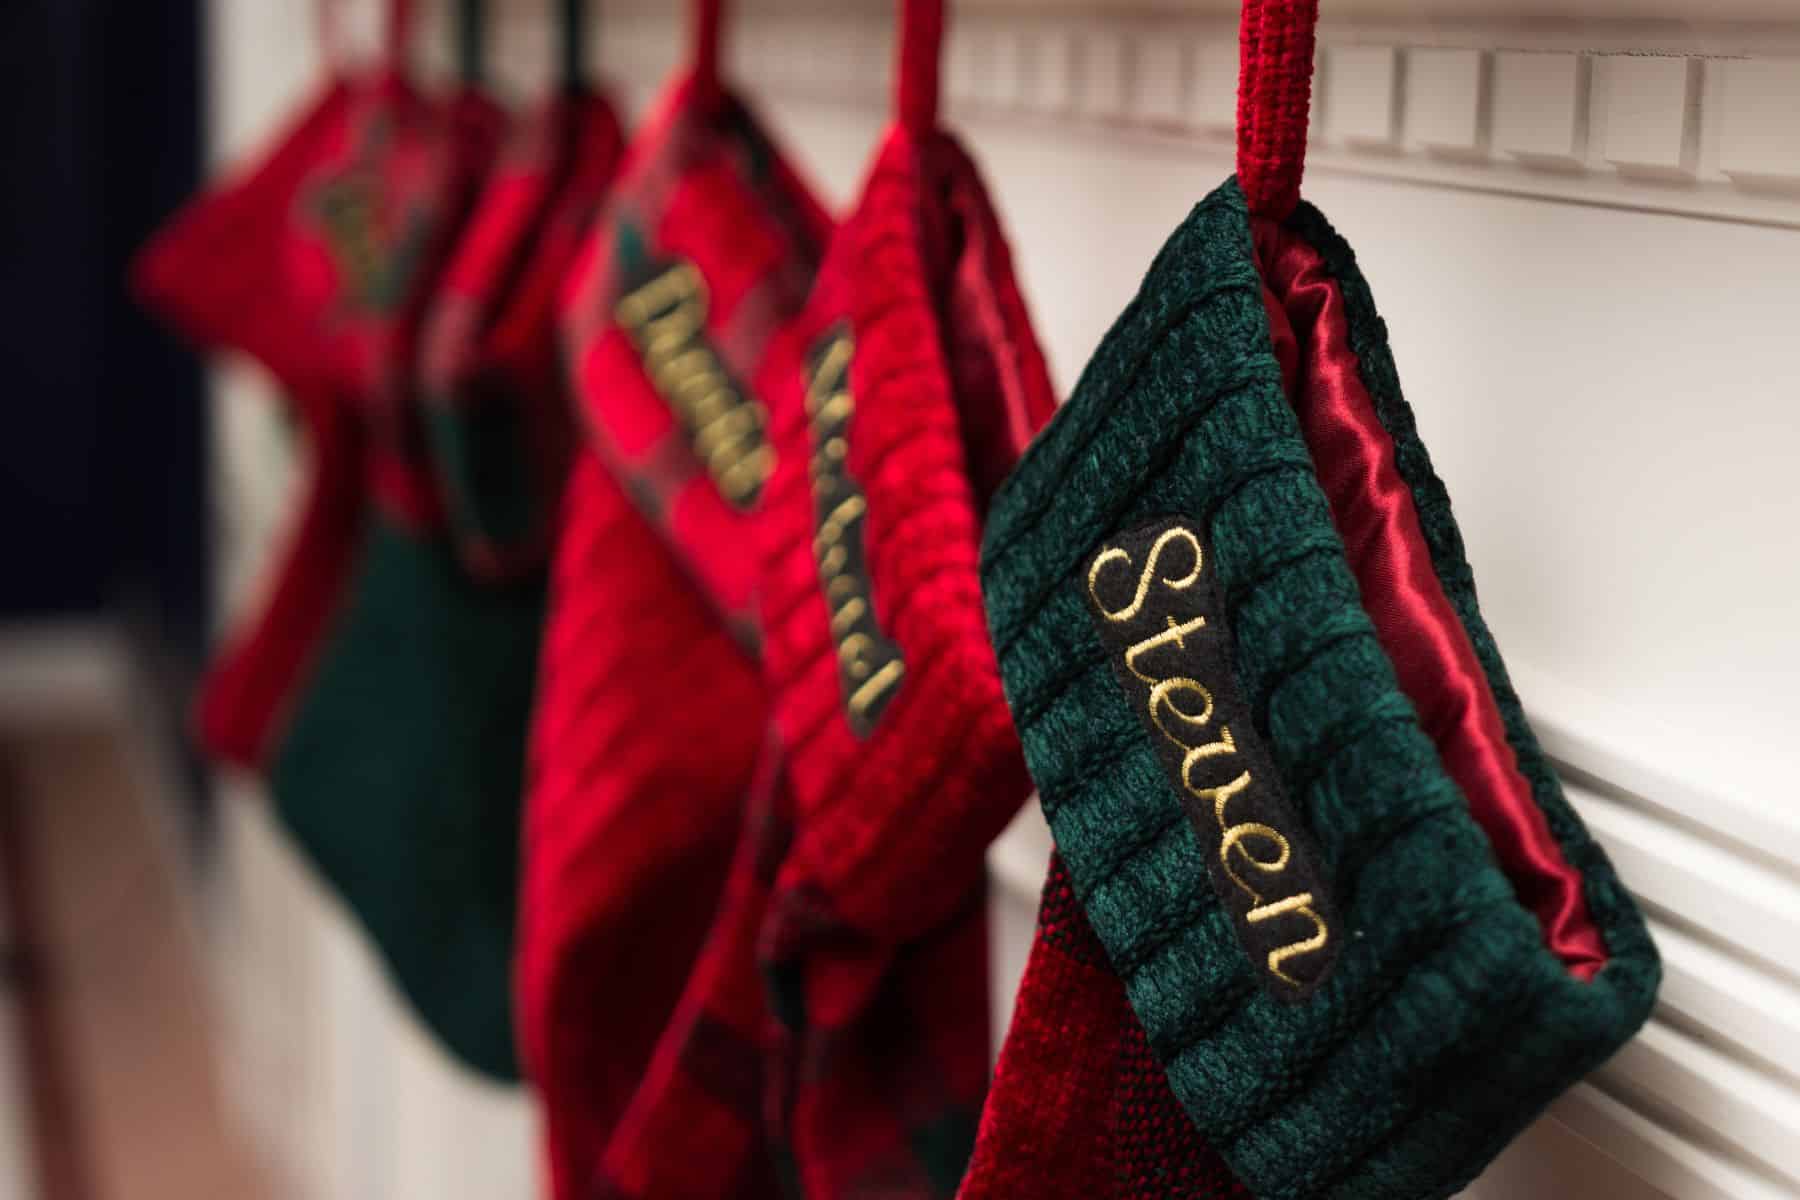 Stockings hanging by a fireplace